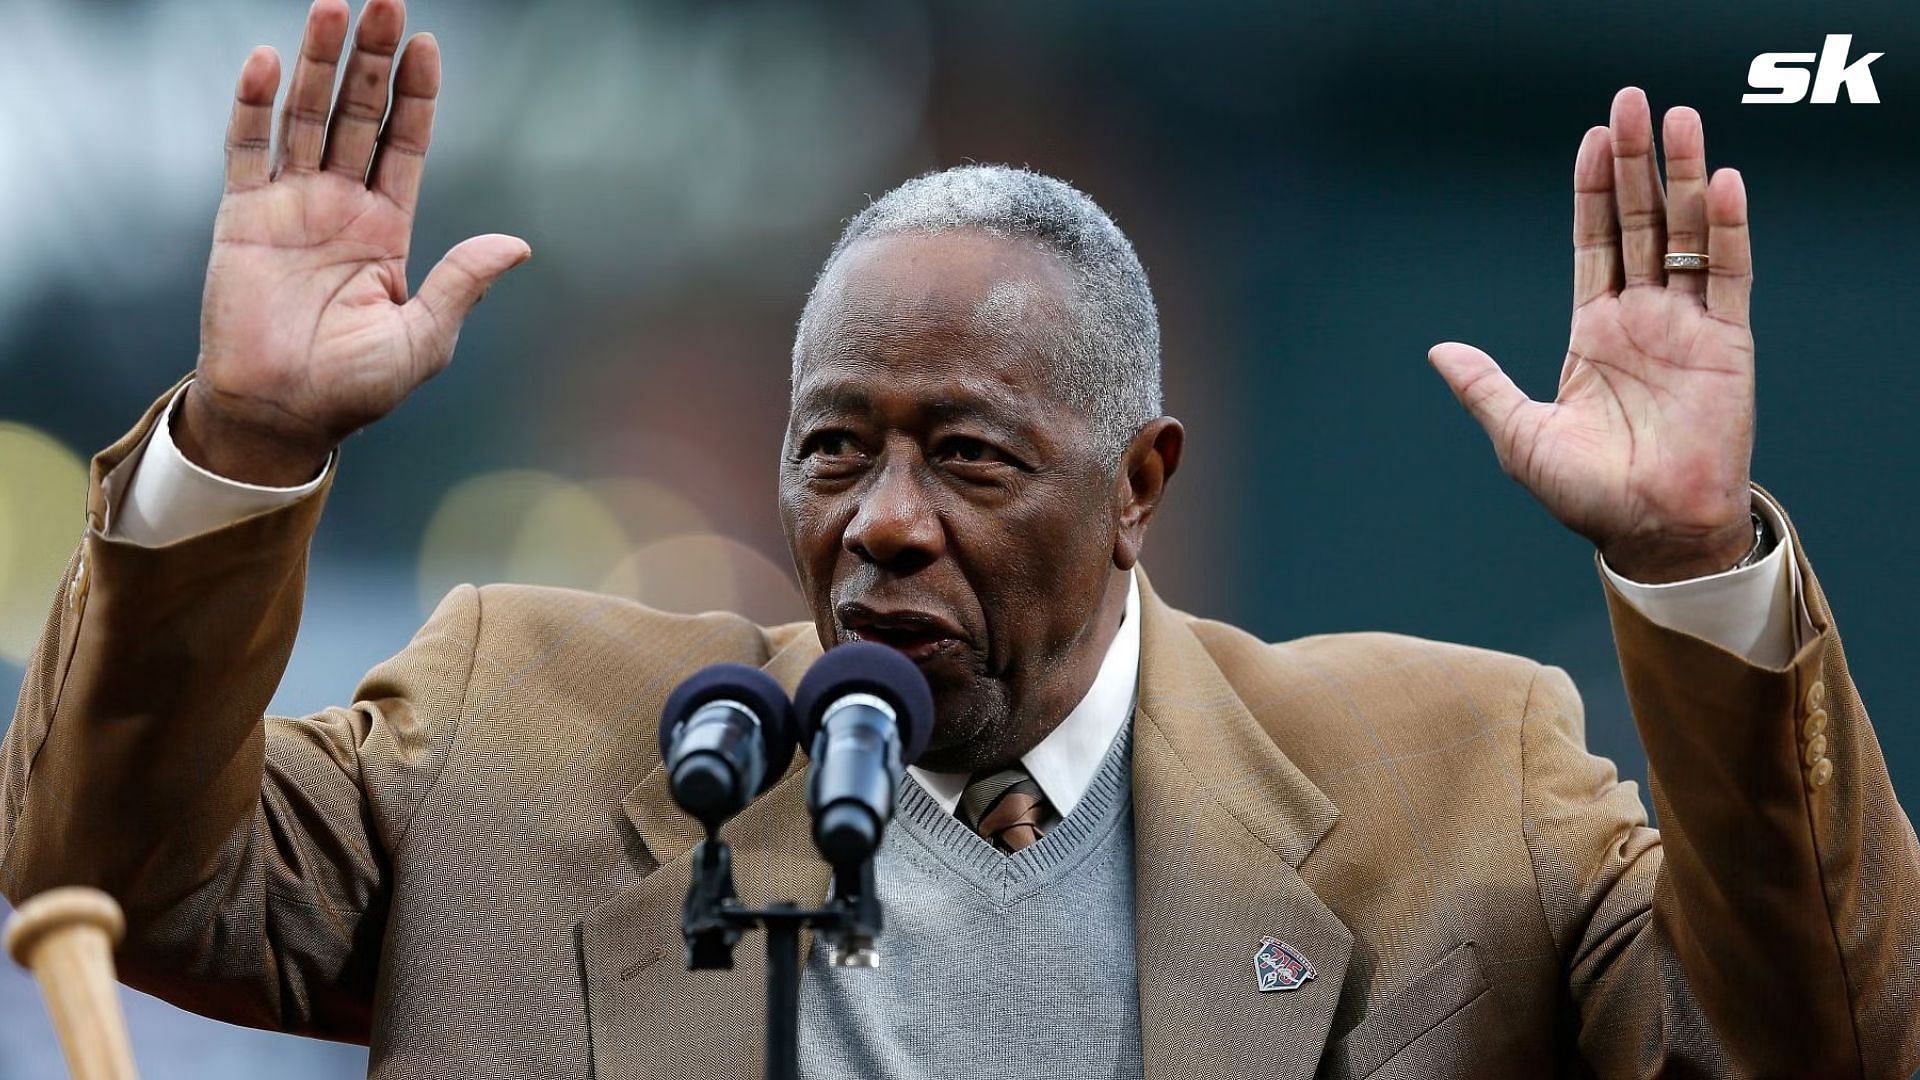 When MLB great Hank Aaron was given a modest evaluation by scouts for having 